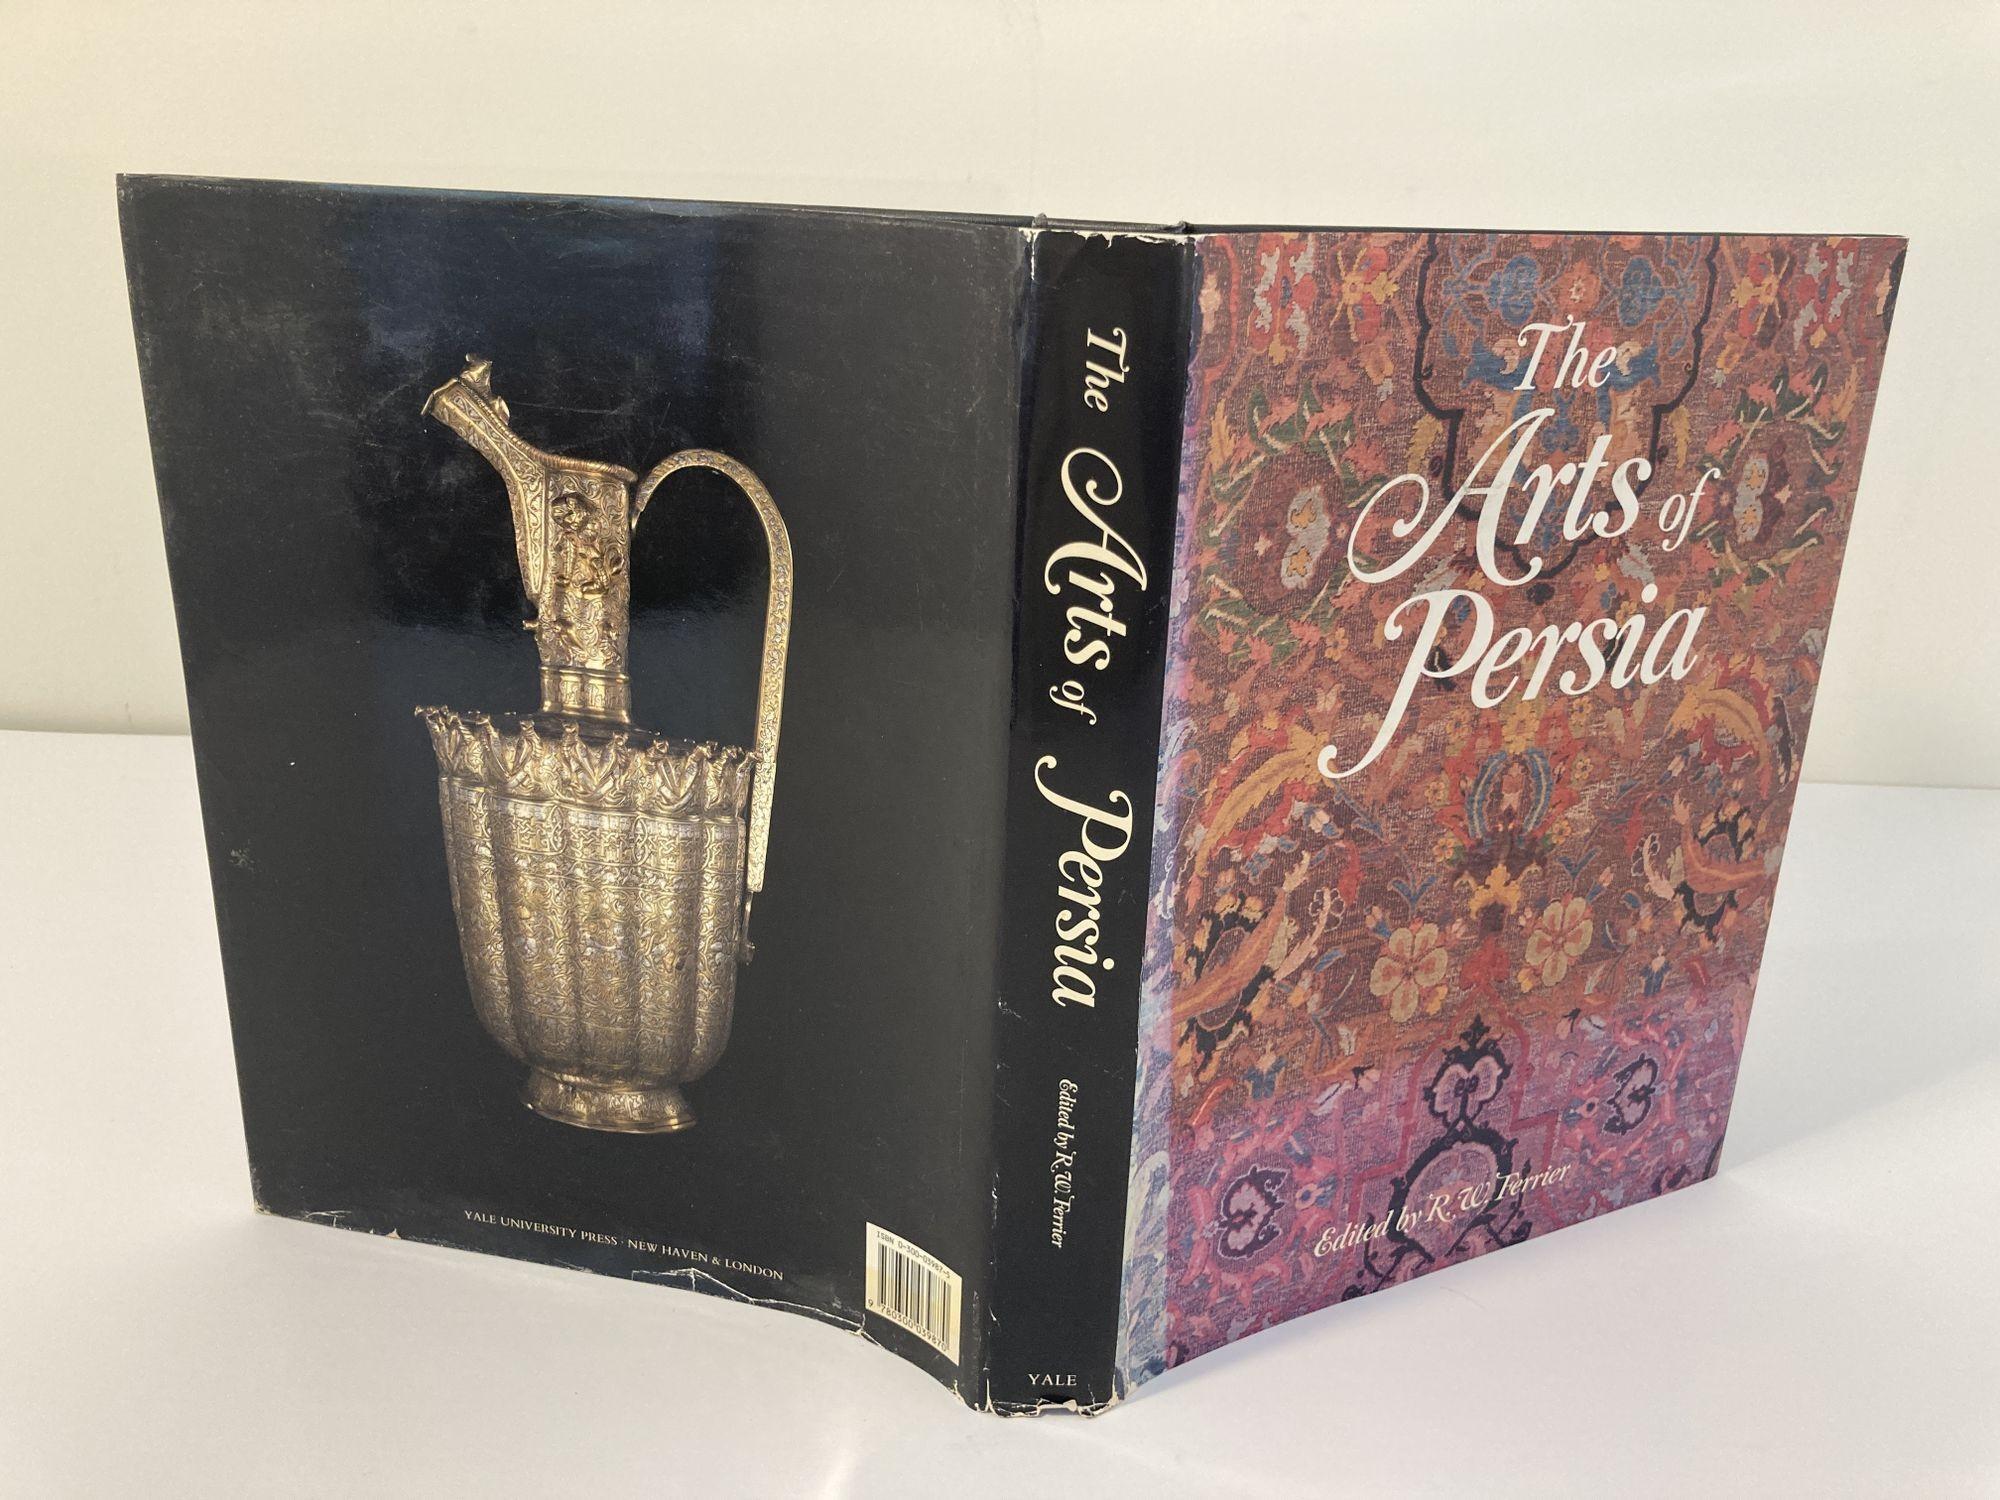 The Arts of Persia Ronald W. Ferrier Hardcover Book 1st Ed. 1989 In Good Condition For Sale In North Hollywood, CA